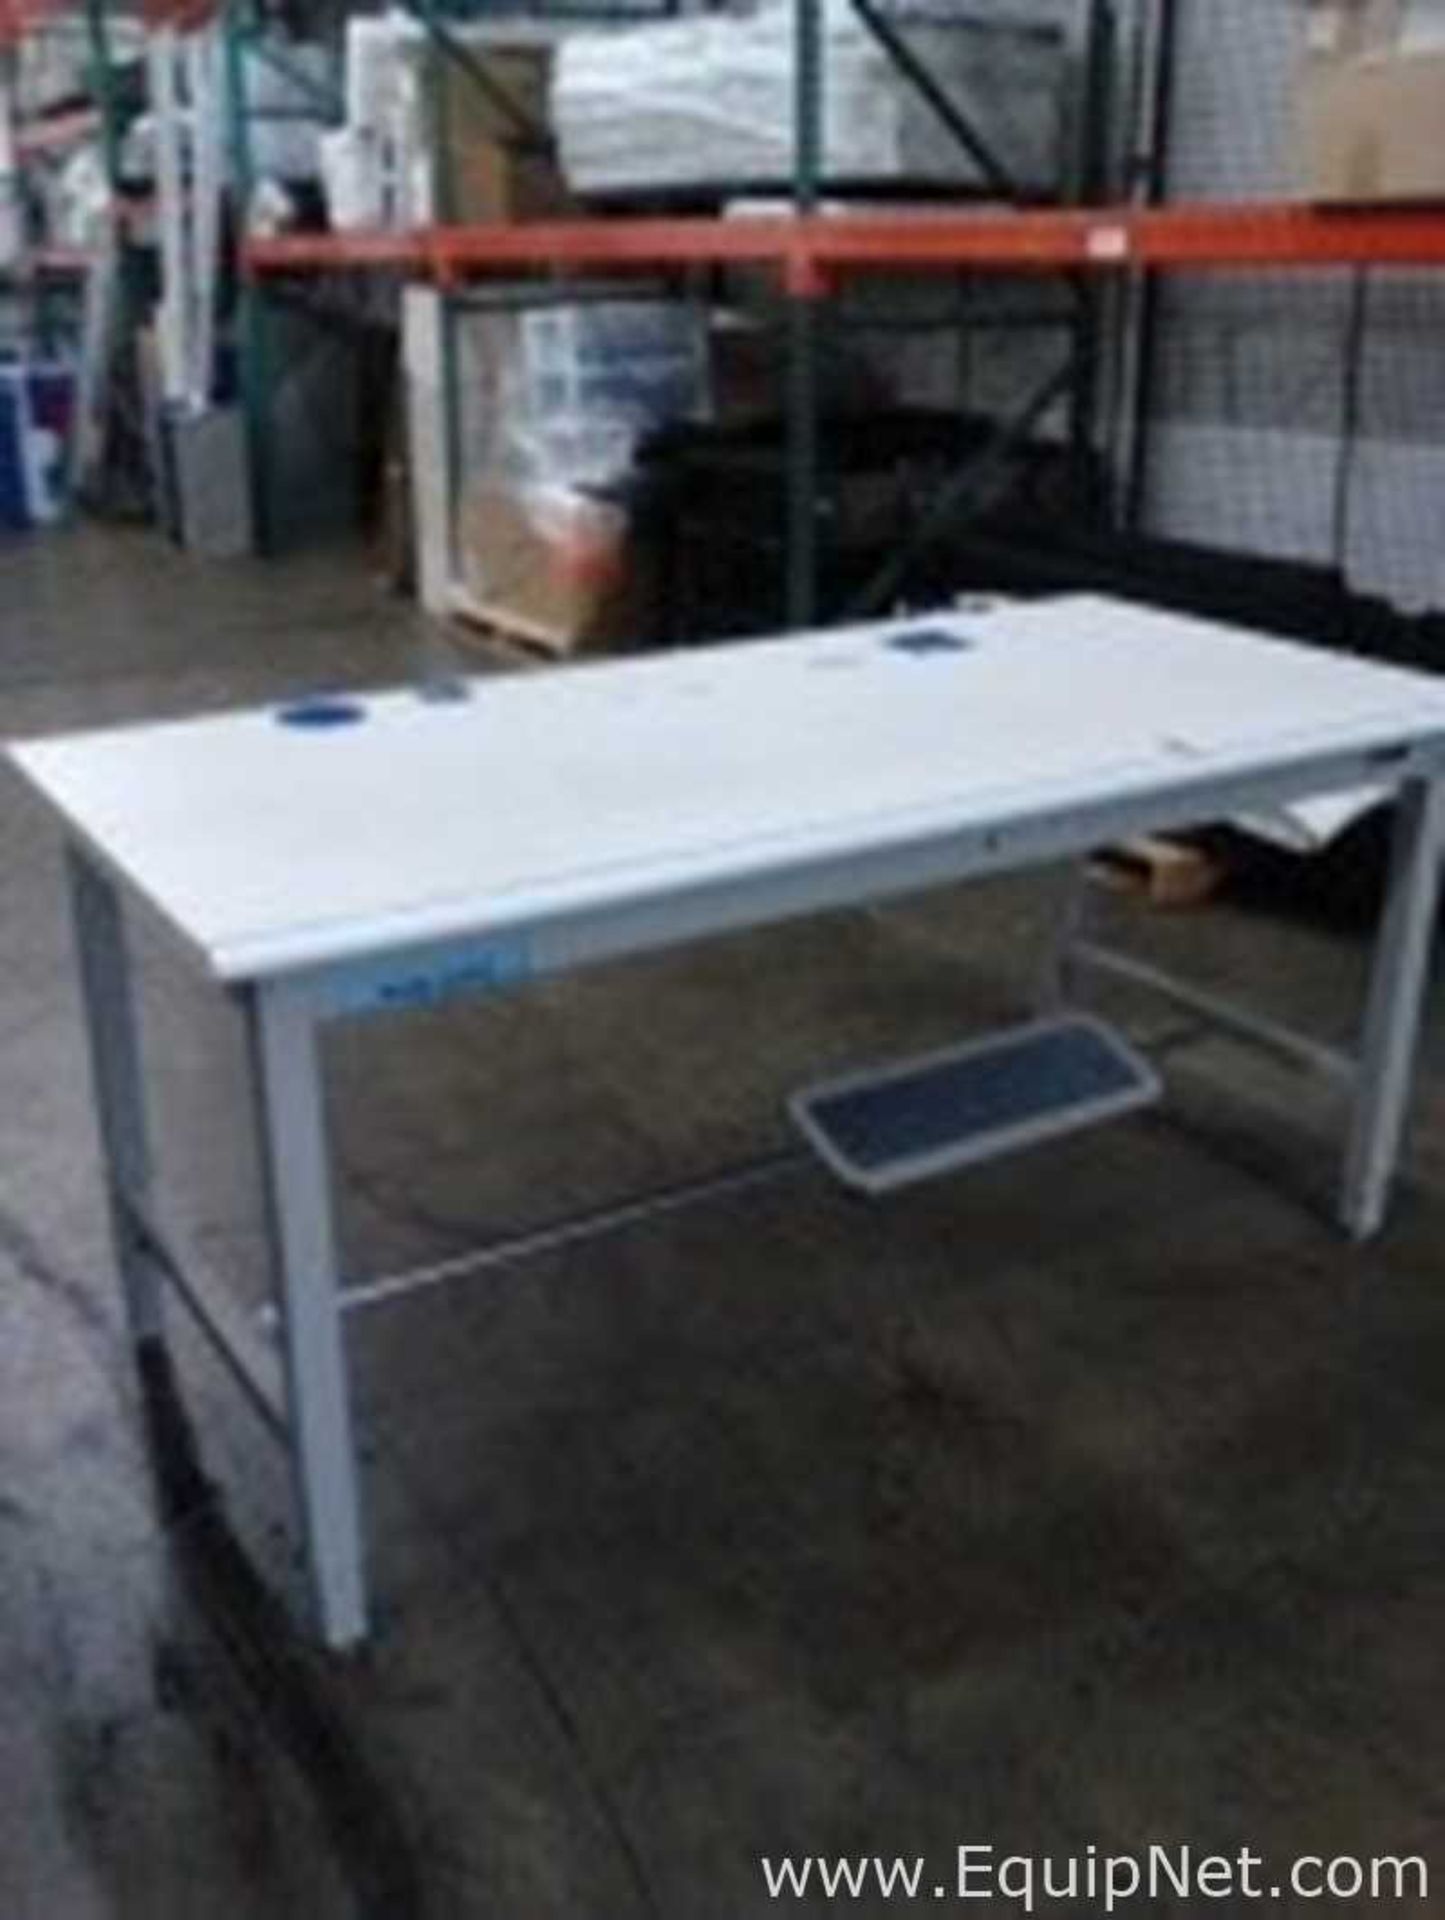 Lot of 10 IAC Industries Workbenches Number 1 - Image 2 of 3